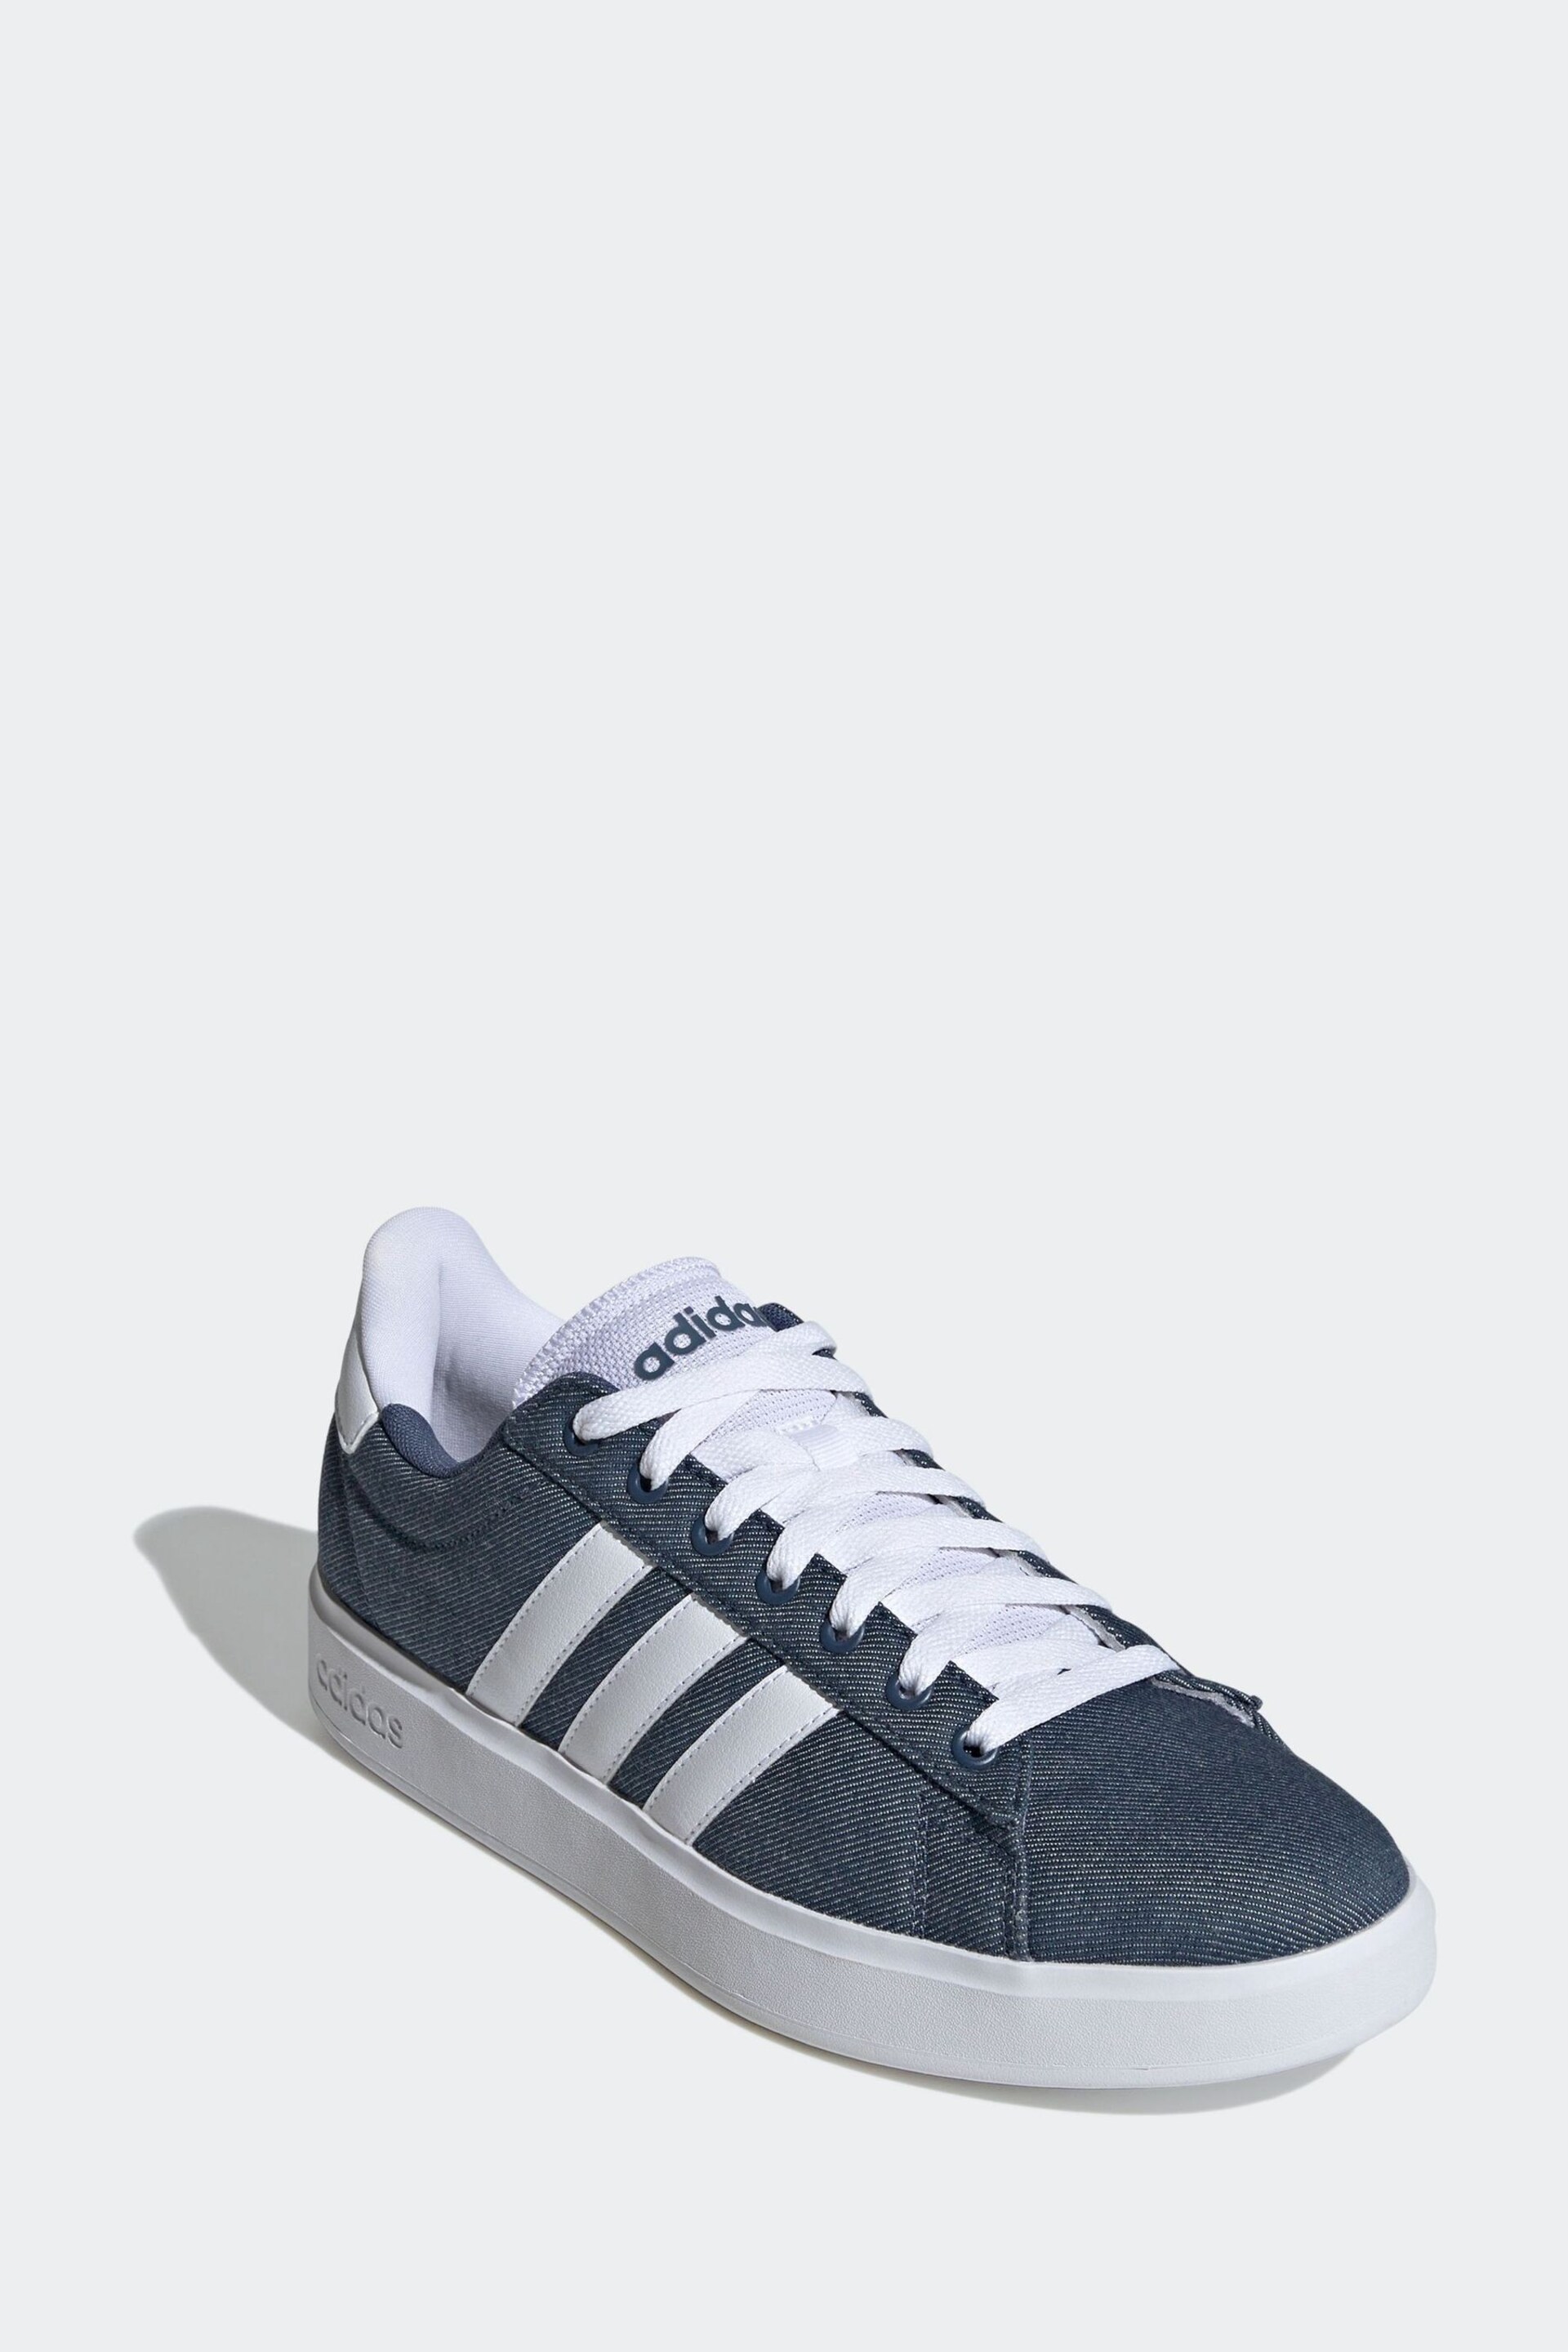 adidas Blue Grand Court 2.0 Trainers - Image 3 of 9